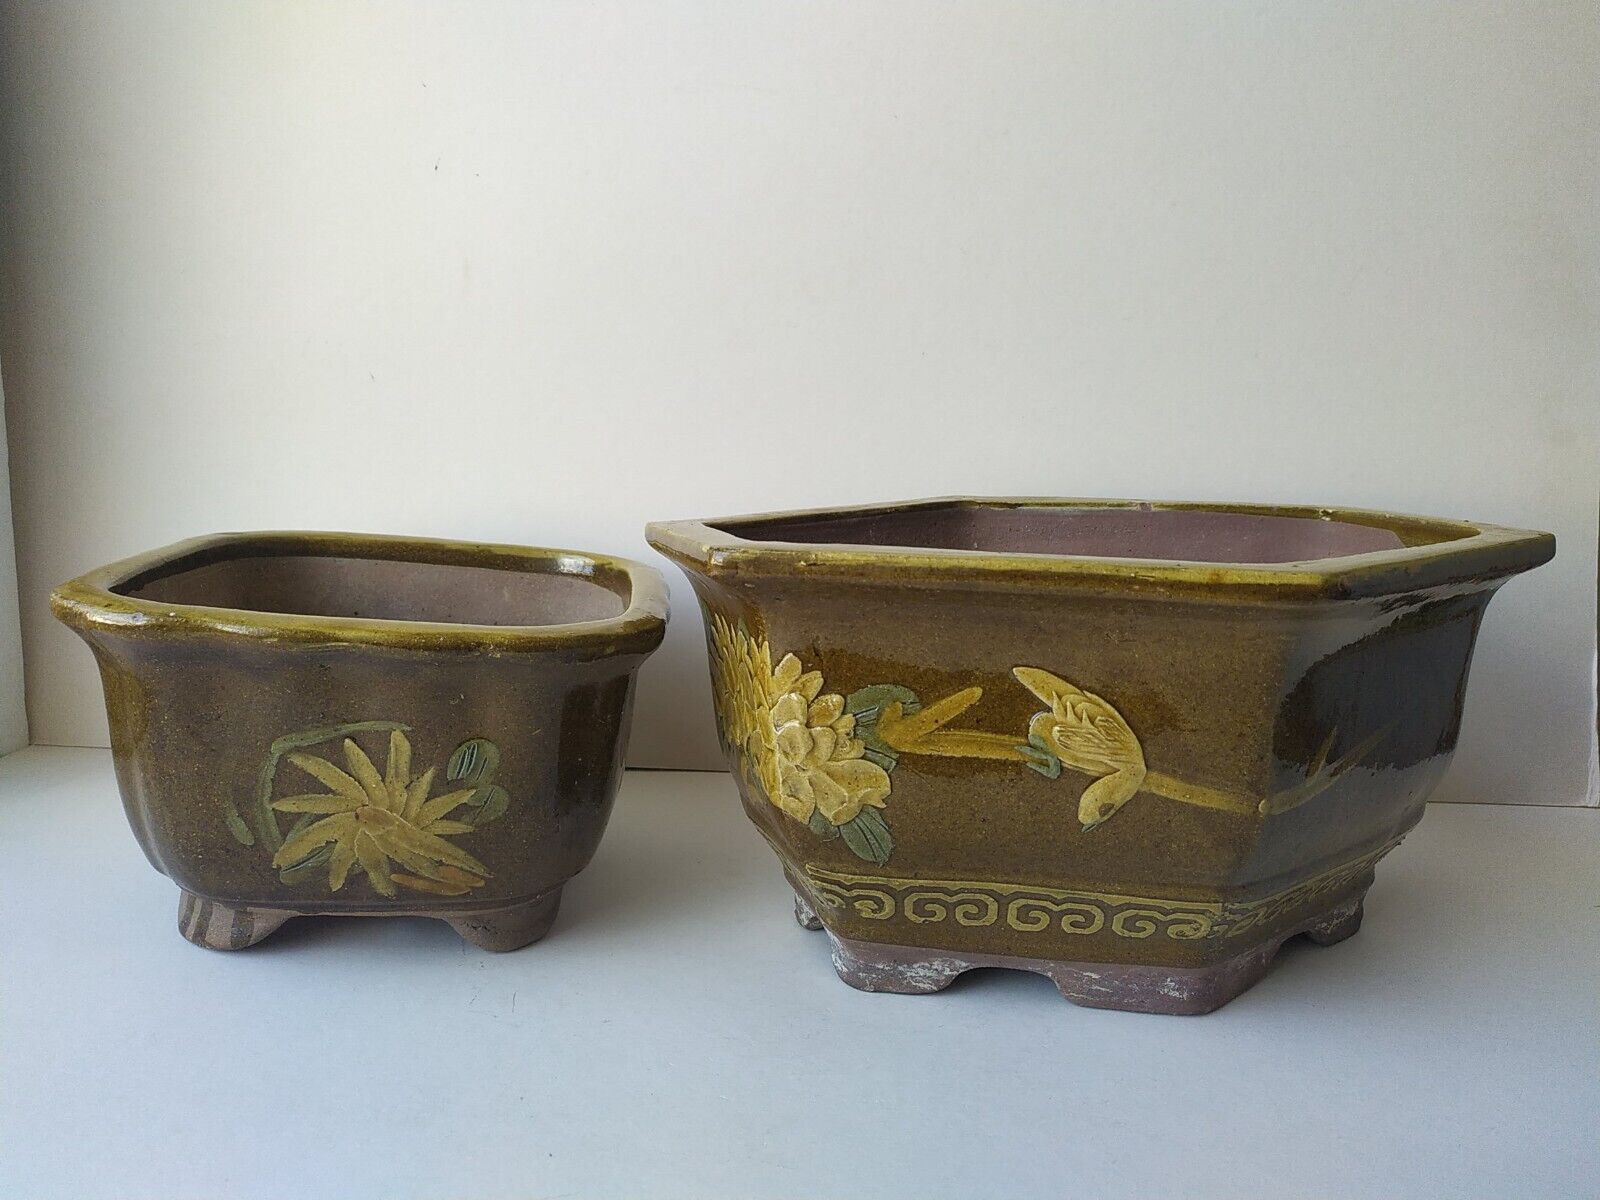 Antique Valuations: Large Chinese Glazed Terracotta Yixing Pottery Planter Pots